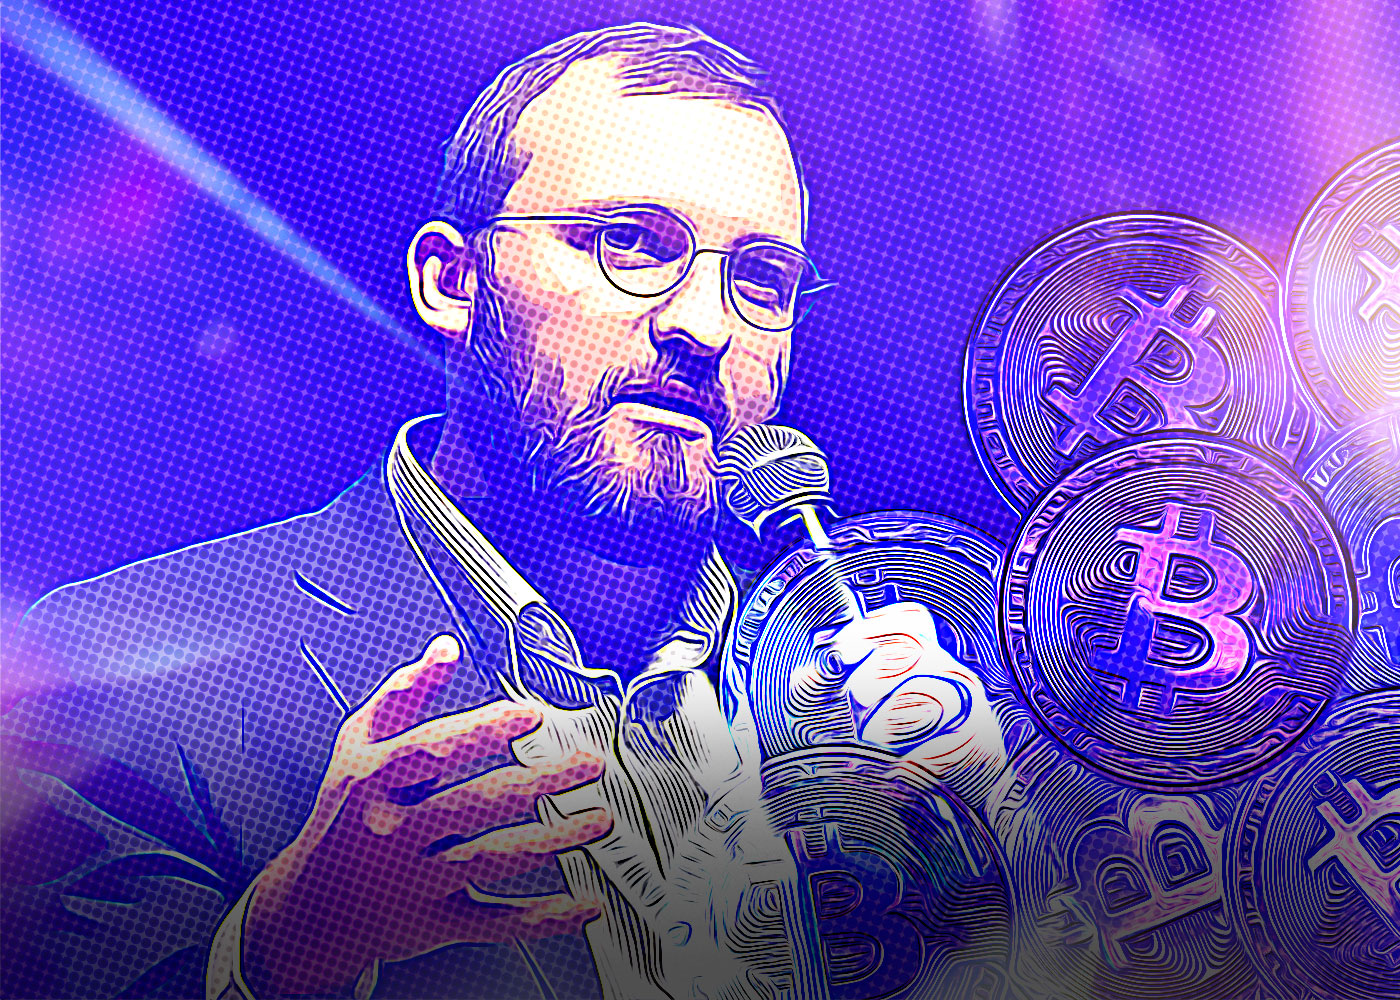 Cardano Founder Charles Hoskinson: Growing Decentralization to Serve as a Wake-Up Call for the Cryptocurrency Industry